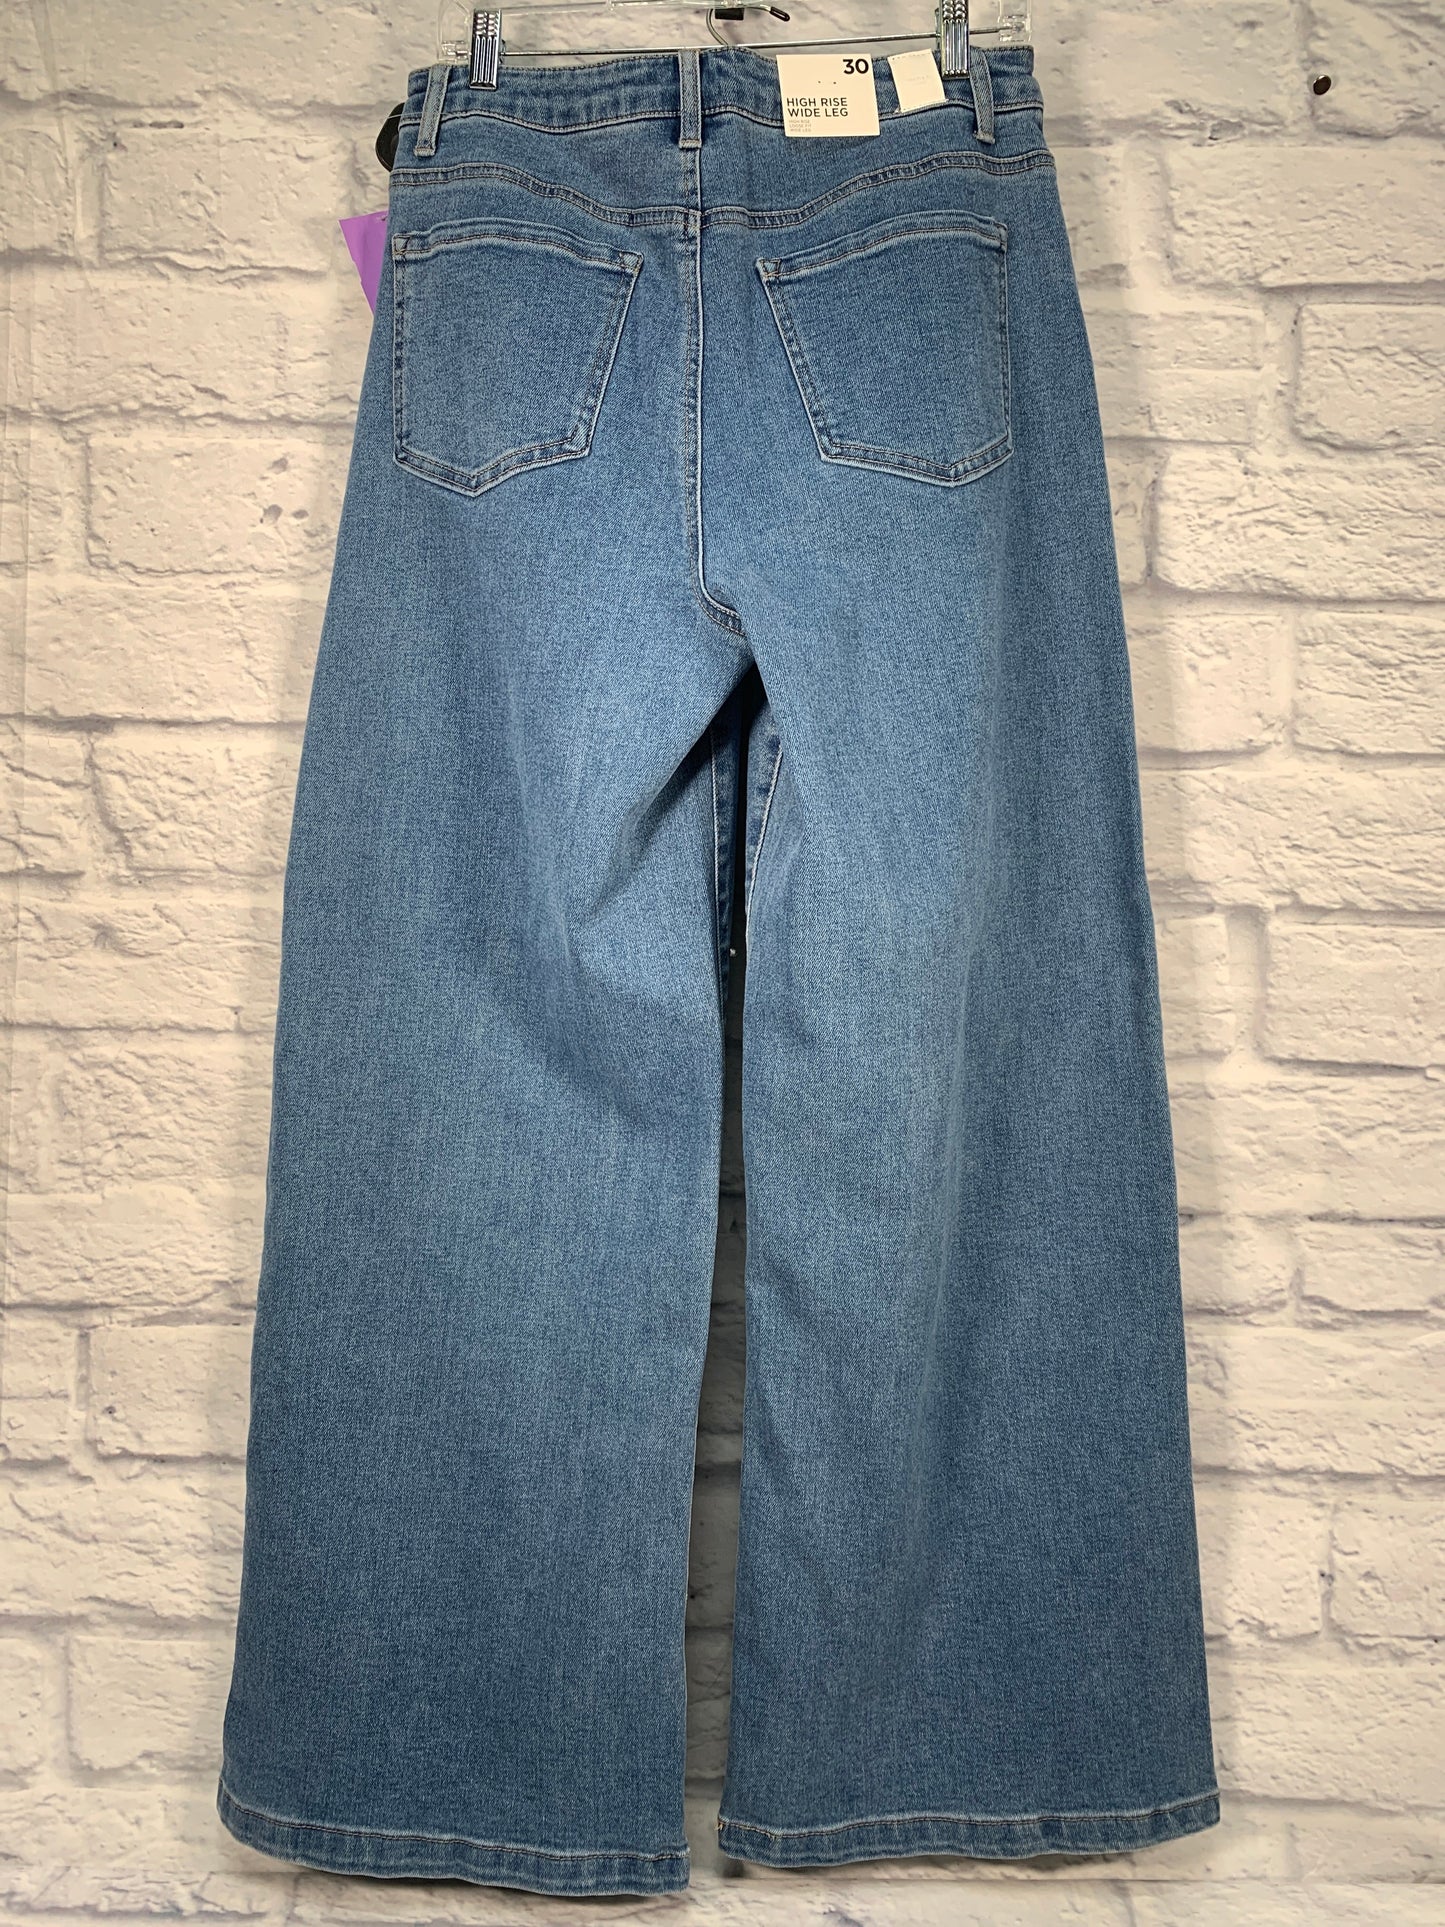 Blue Jeans Wide Leg Forever 21, Size 10